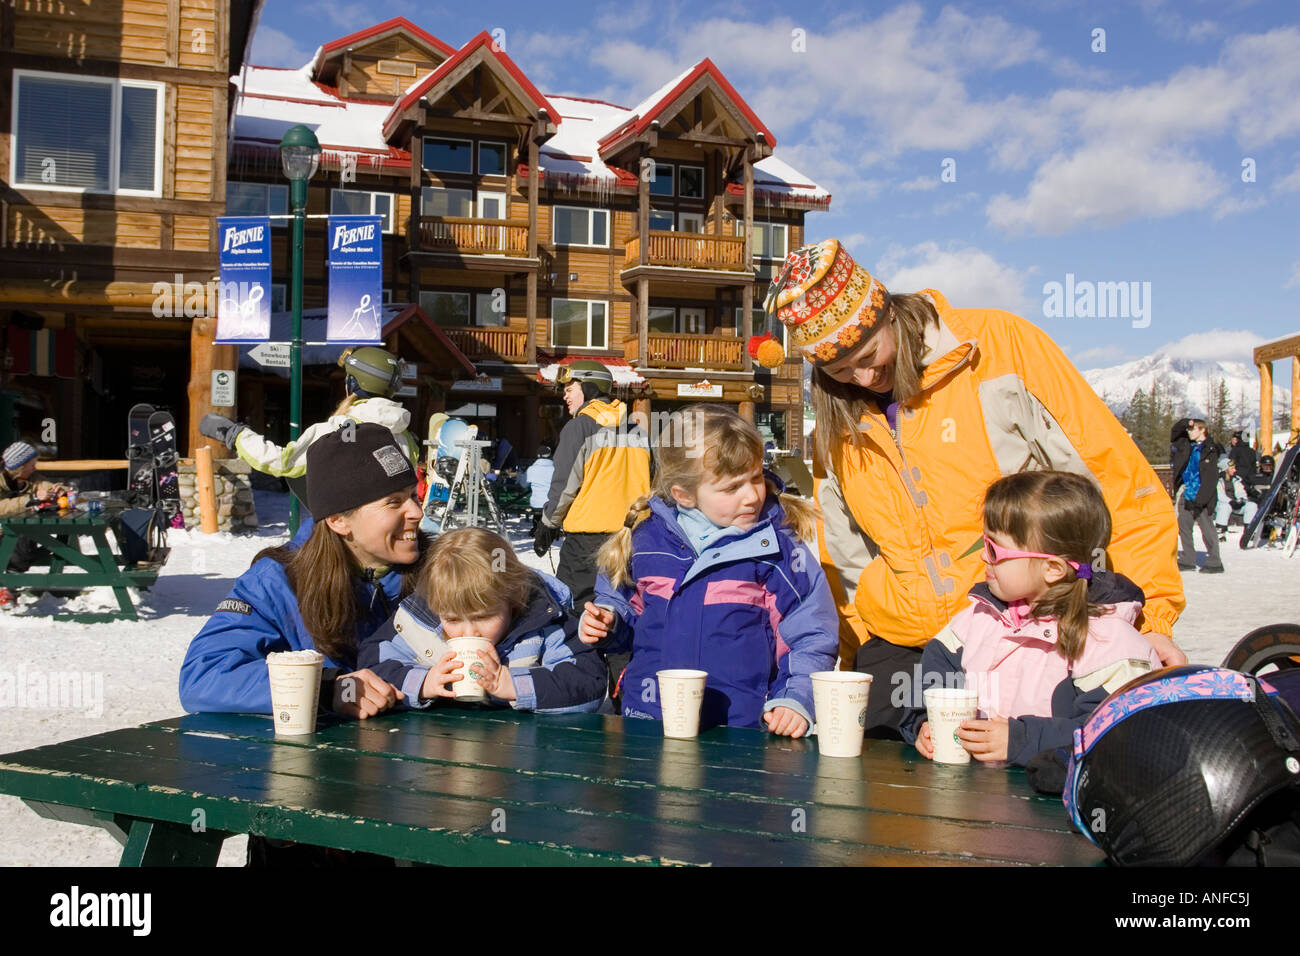 Two mothers enjoy hot chocolates with daughters at Fernie Alpine Resort, Fernie, British Columbia, Canada. Stock Photo